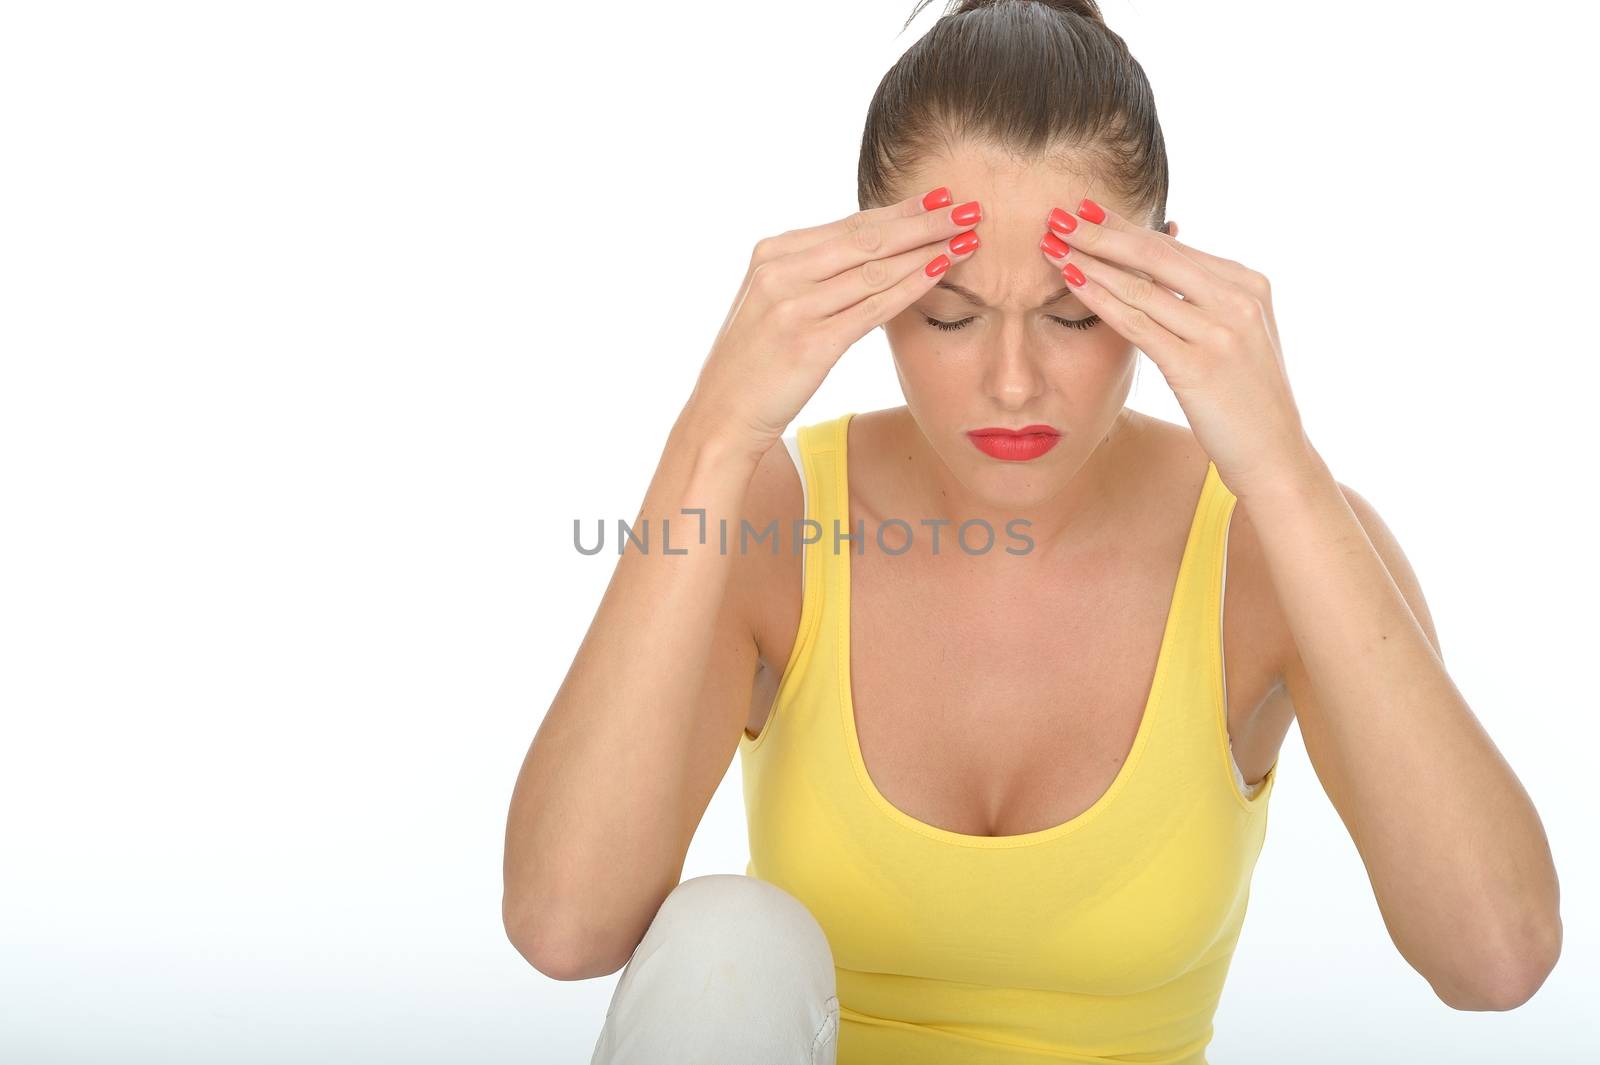 Stressed Young Woman Sitting on the Floor Rubbing Her Forehead by Whiteboxmedia